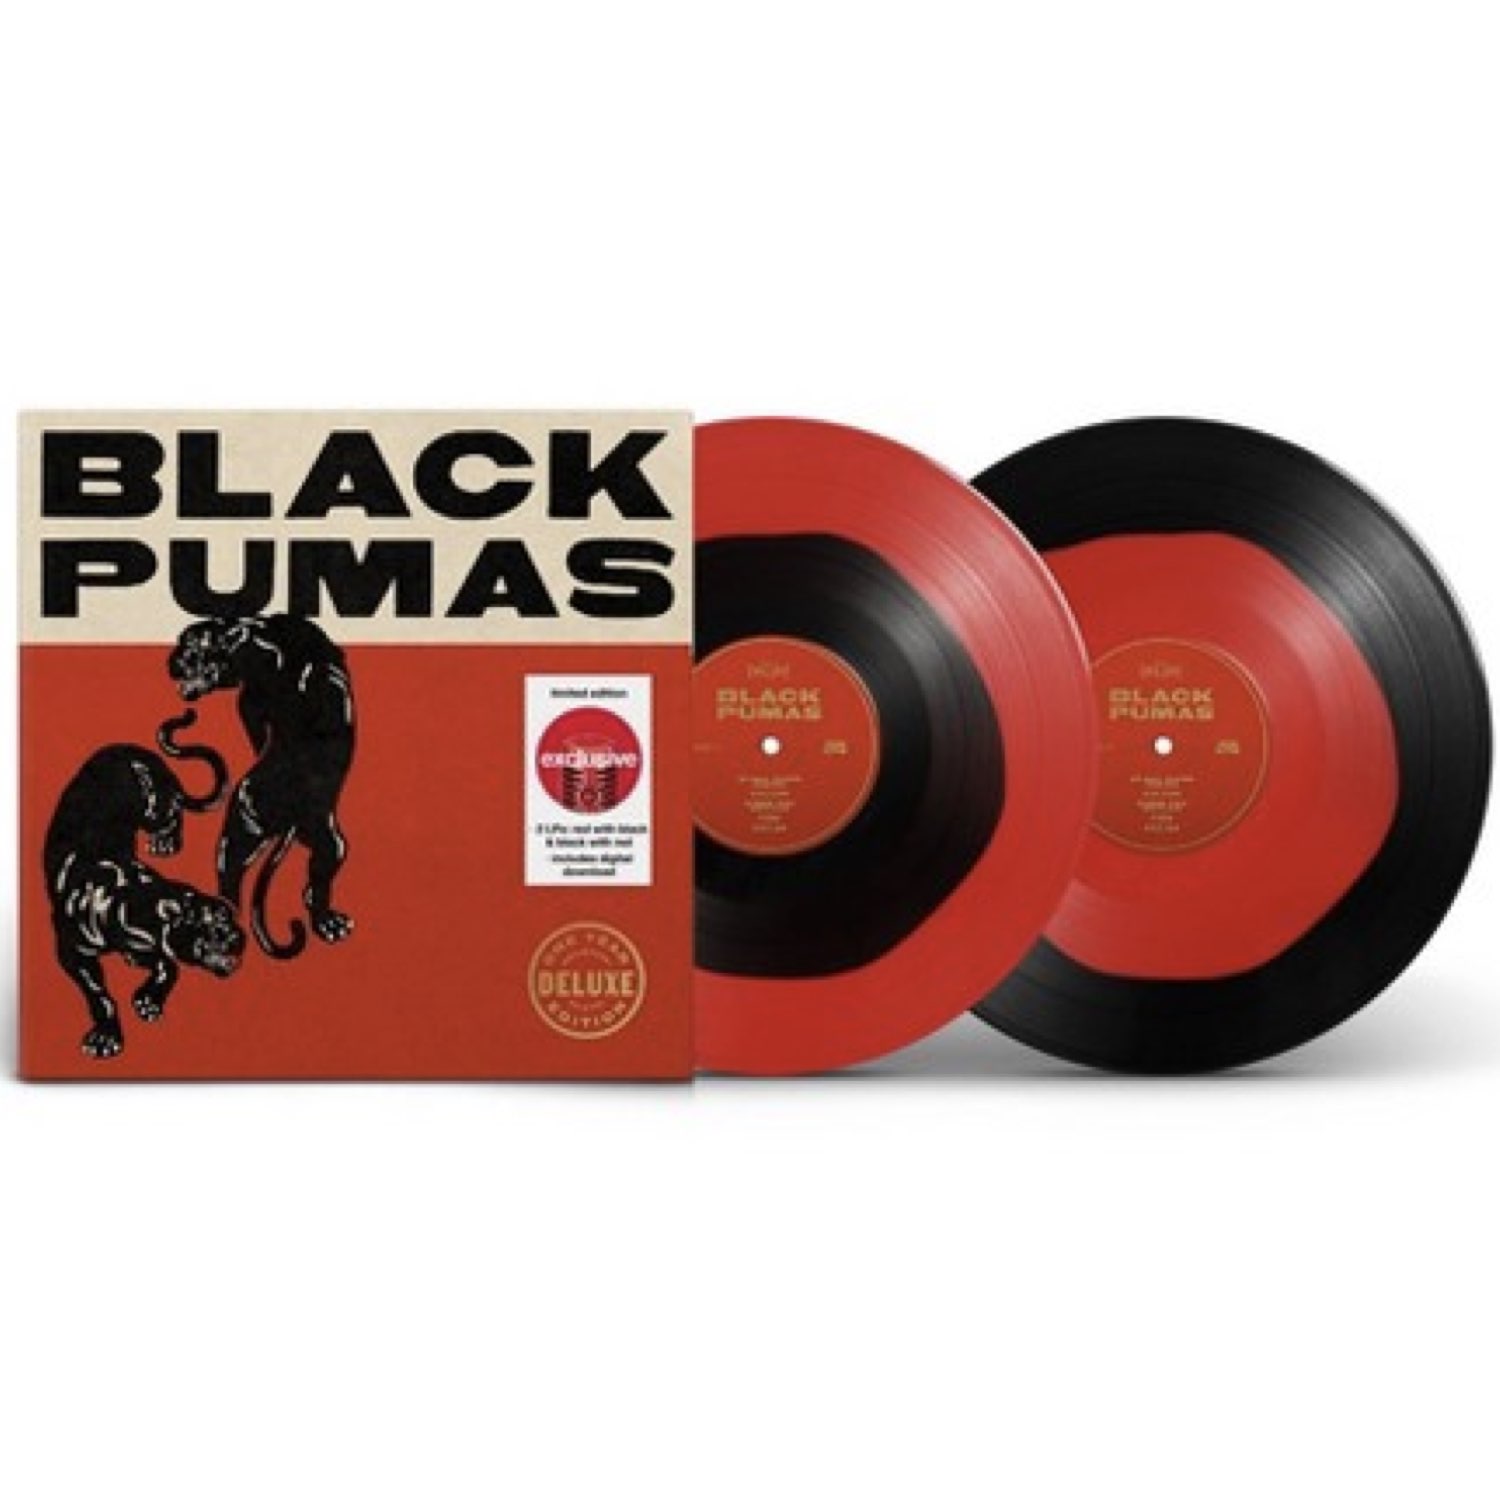 Black Pumas - Black Pumas [Limited Edition - Red With Black & Black With Red - Target Exclusive]